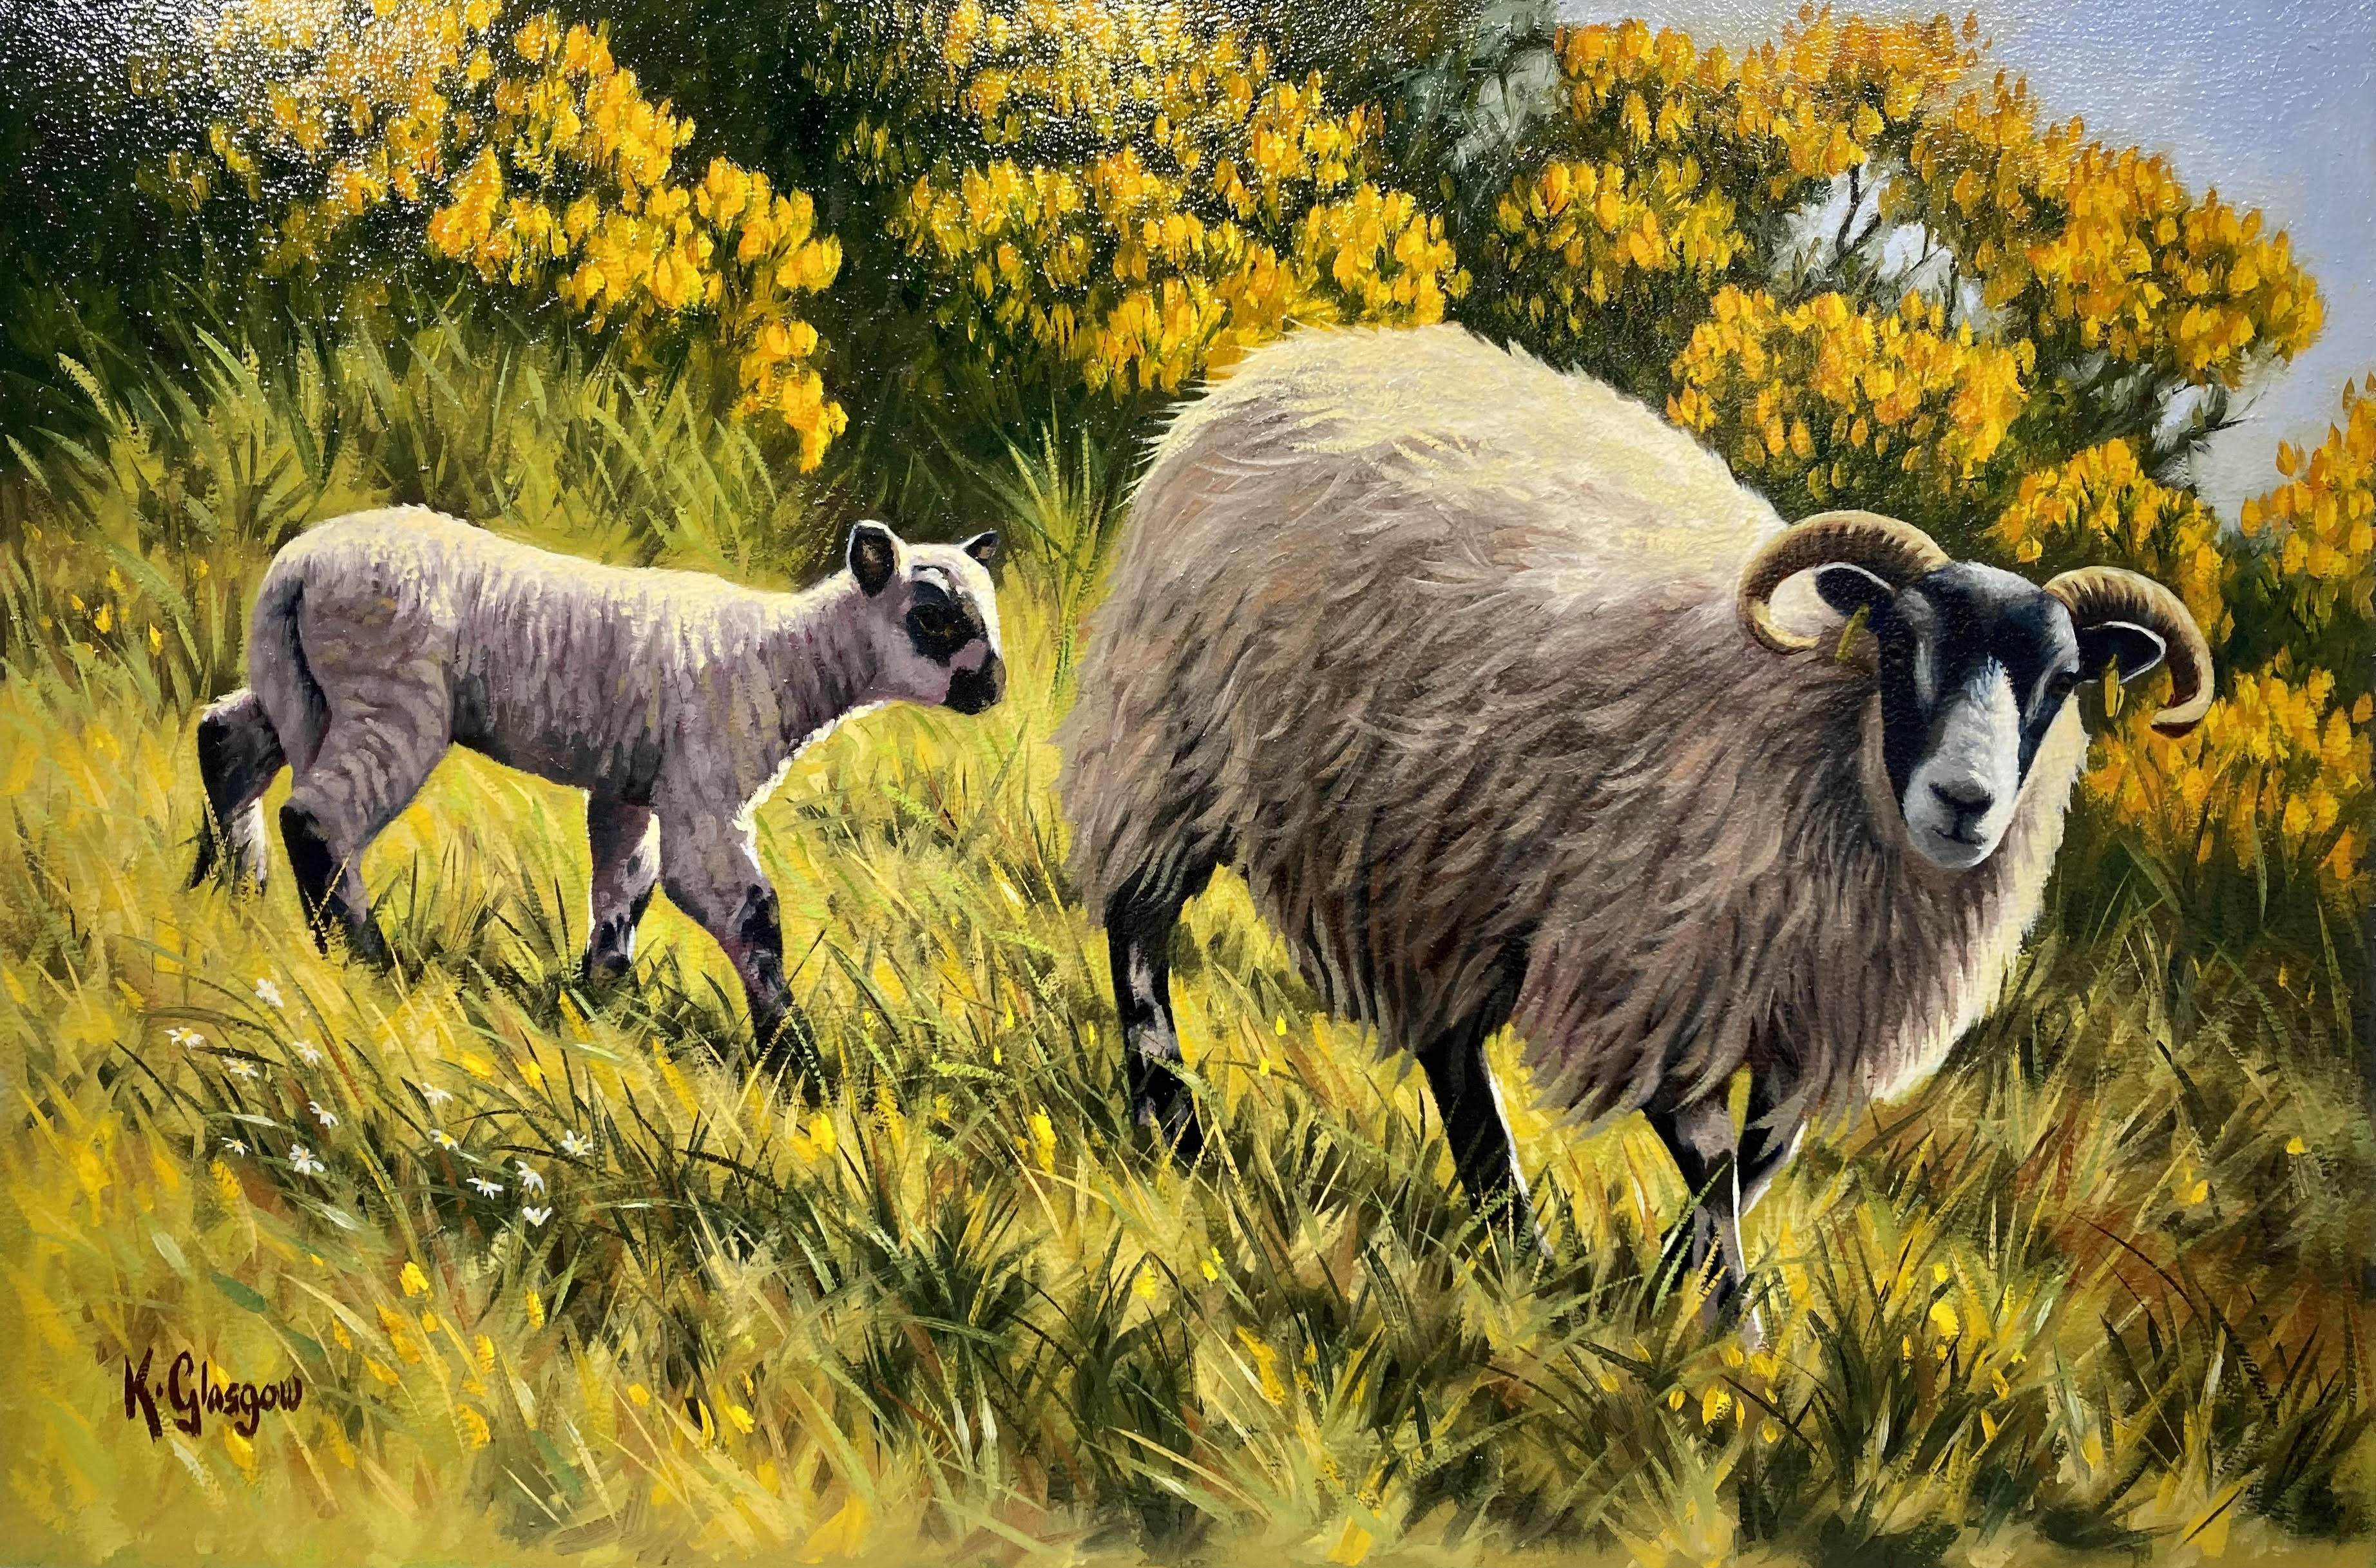 Hillside Ewe and Lamb by Keith Glasgow